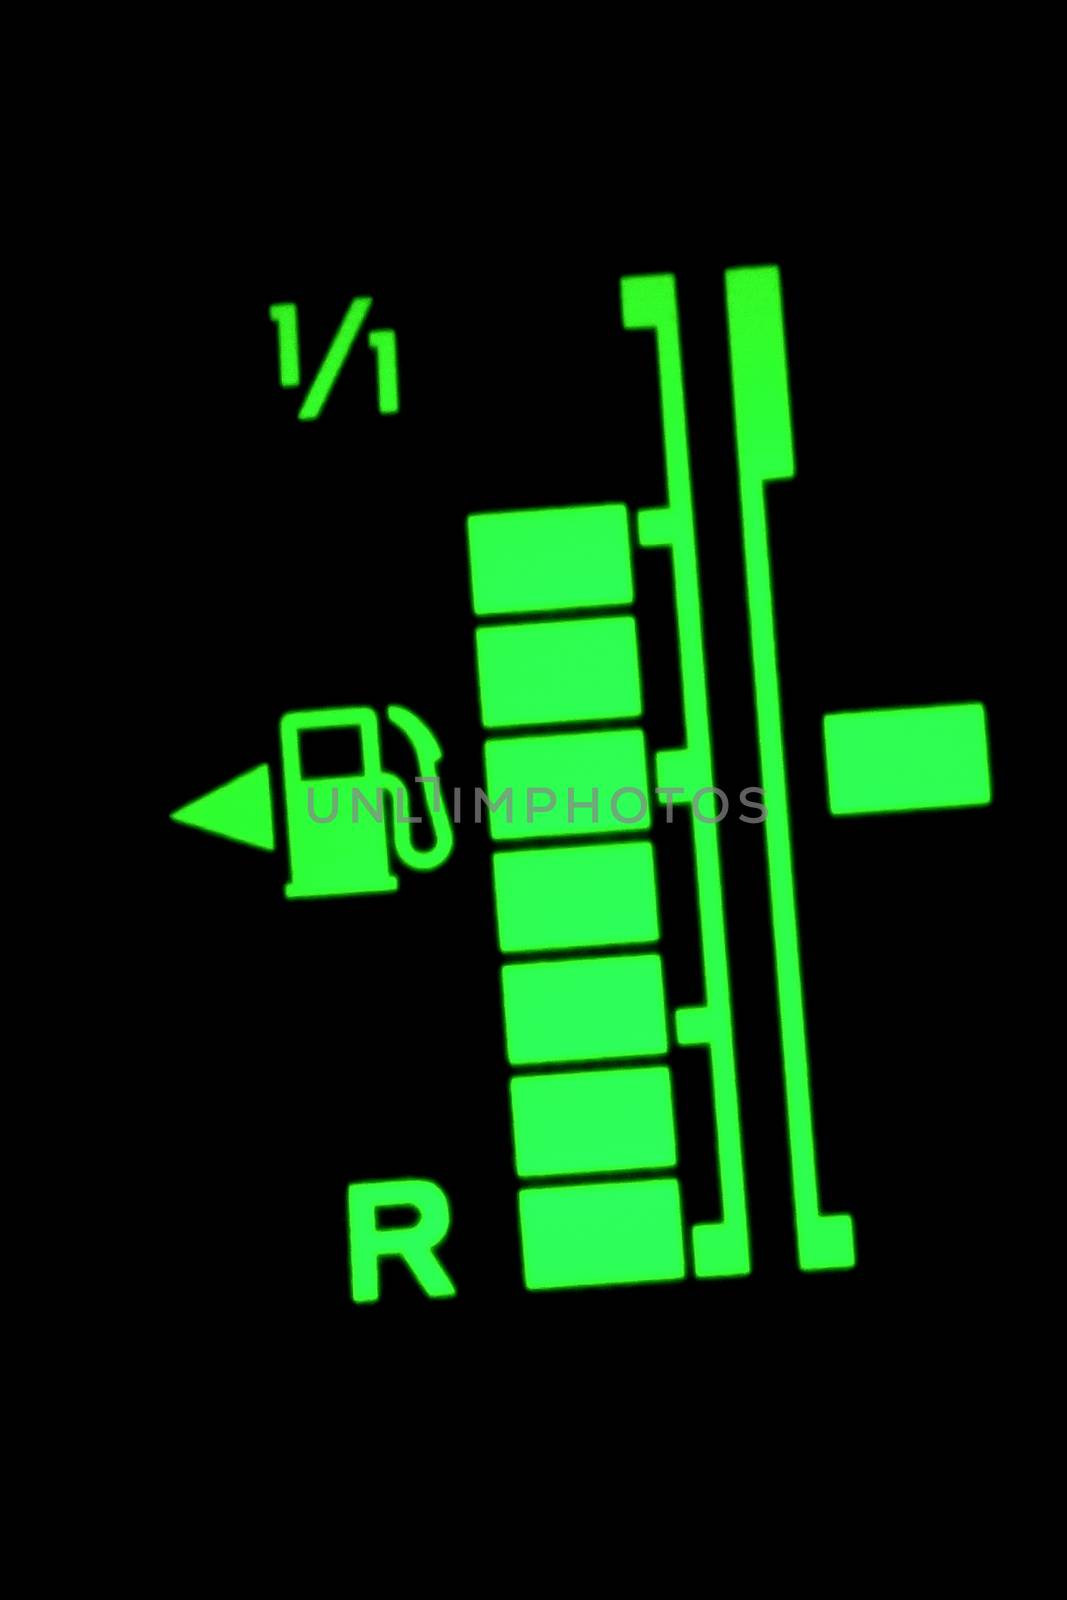 Fuel indicator on the dashboard of a car